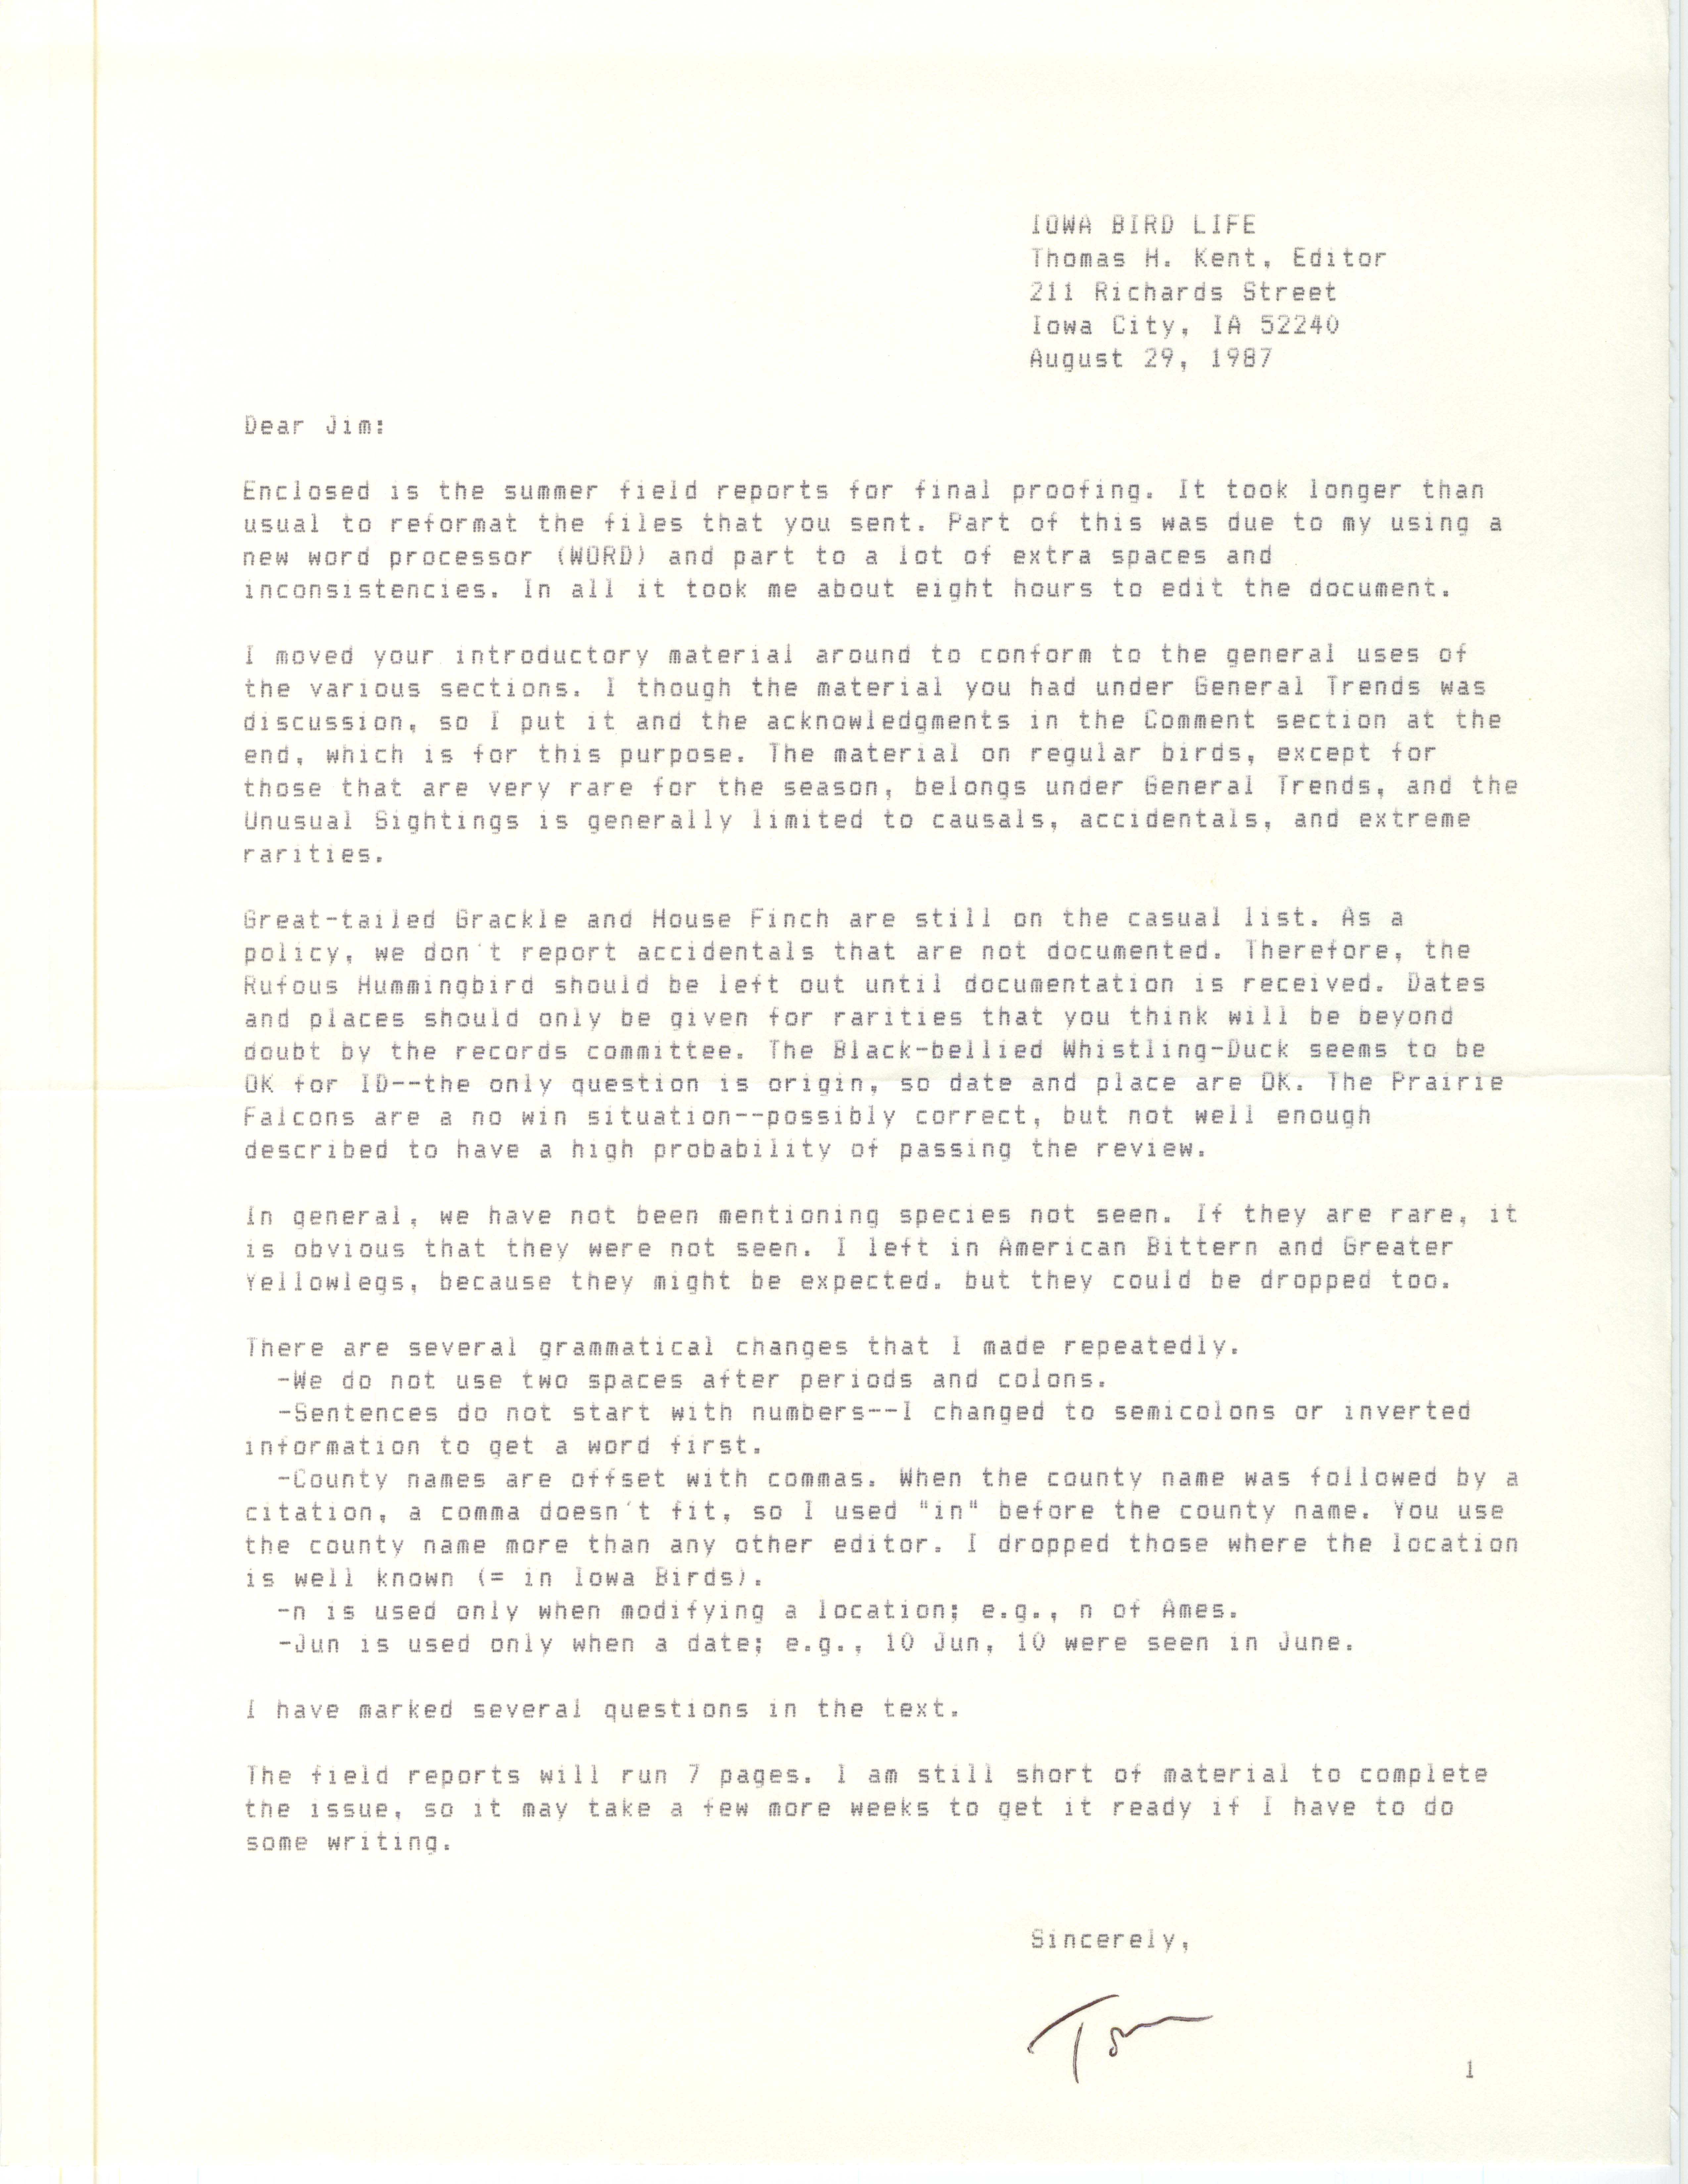 Thomas H. Kent letter to James J. Dinsmore regarding the design and editing of the summer field report for Iowa Bird Life, August 29, 1987